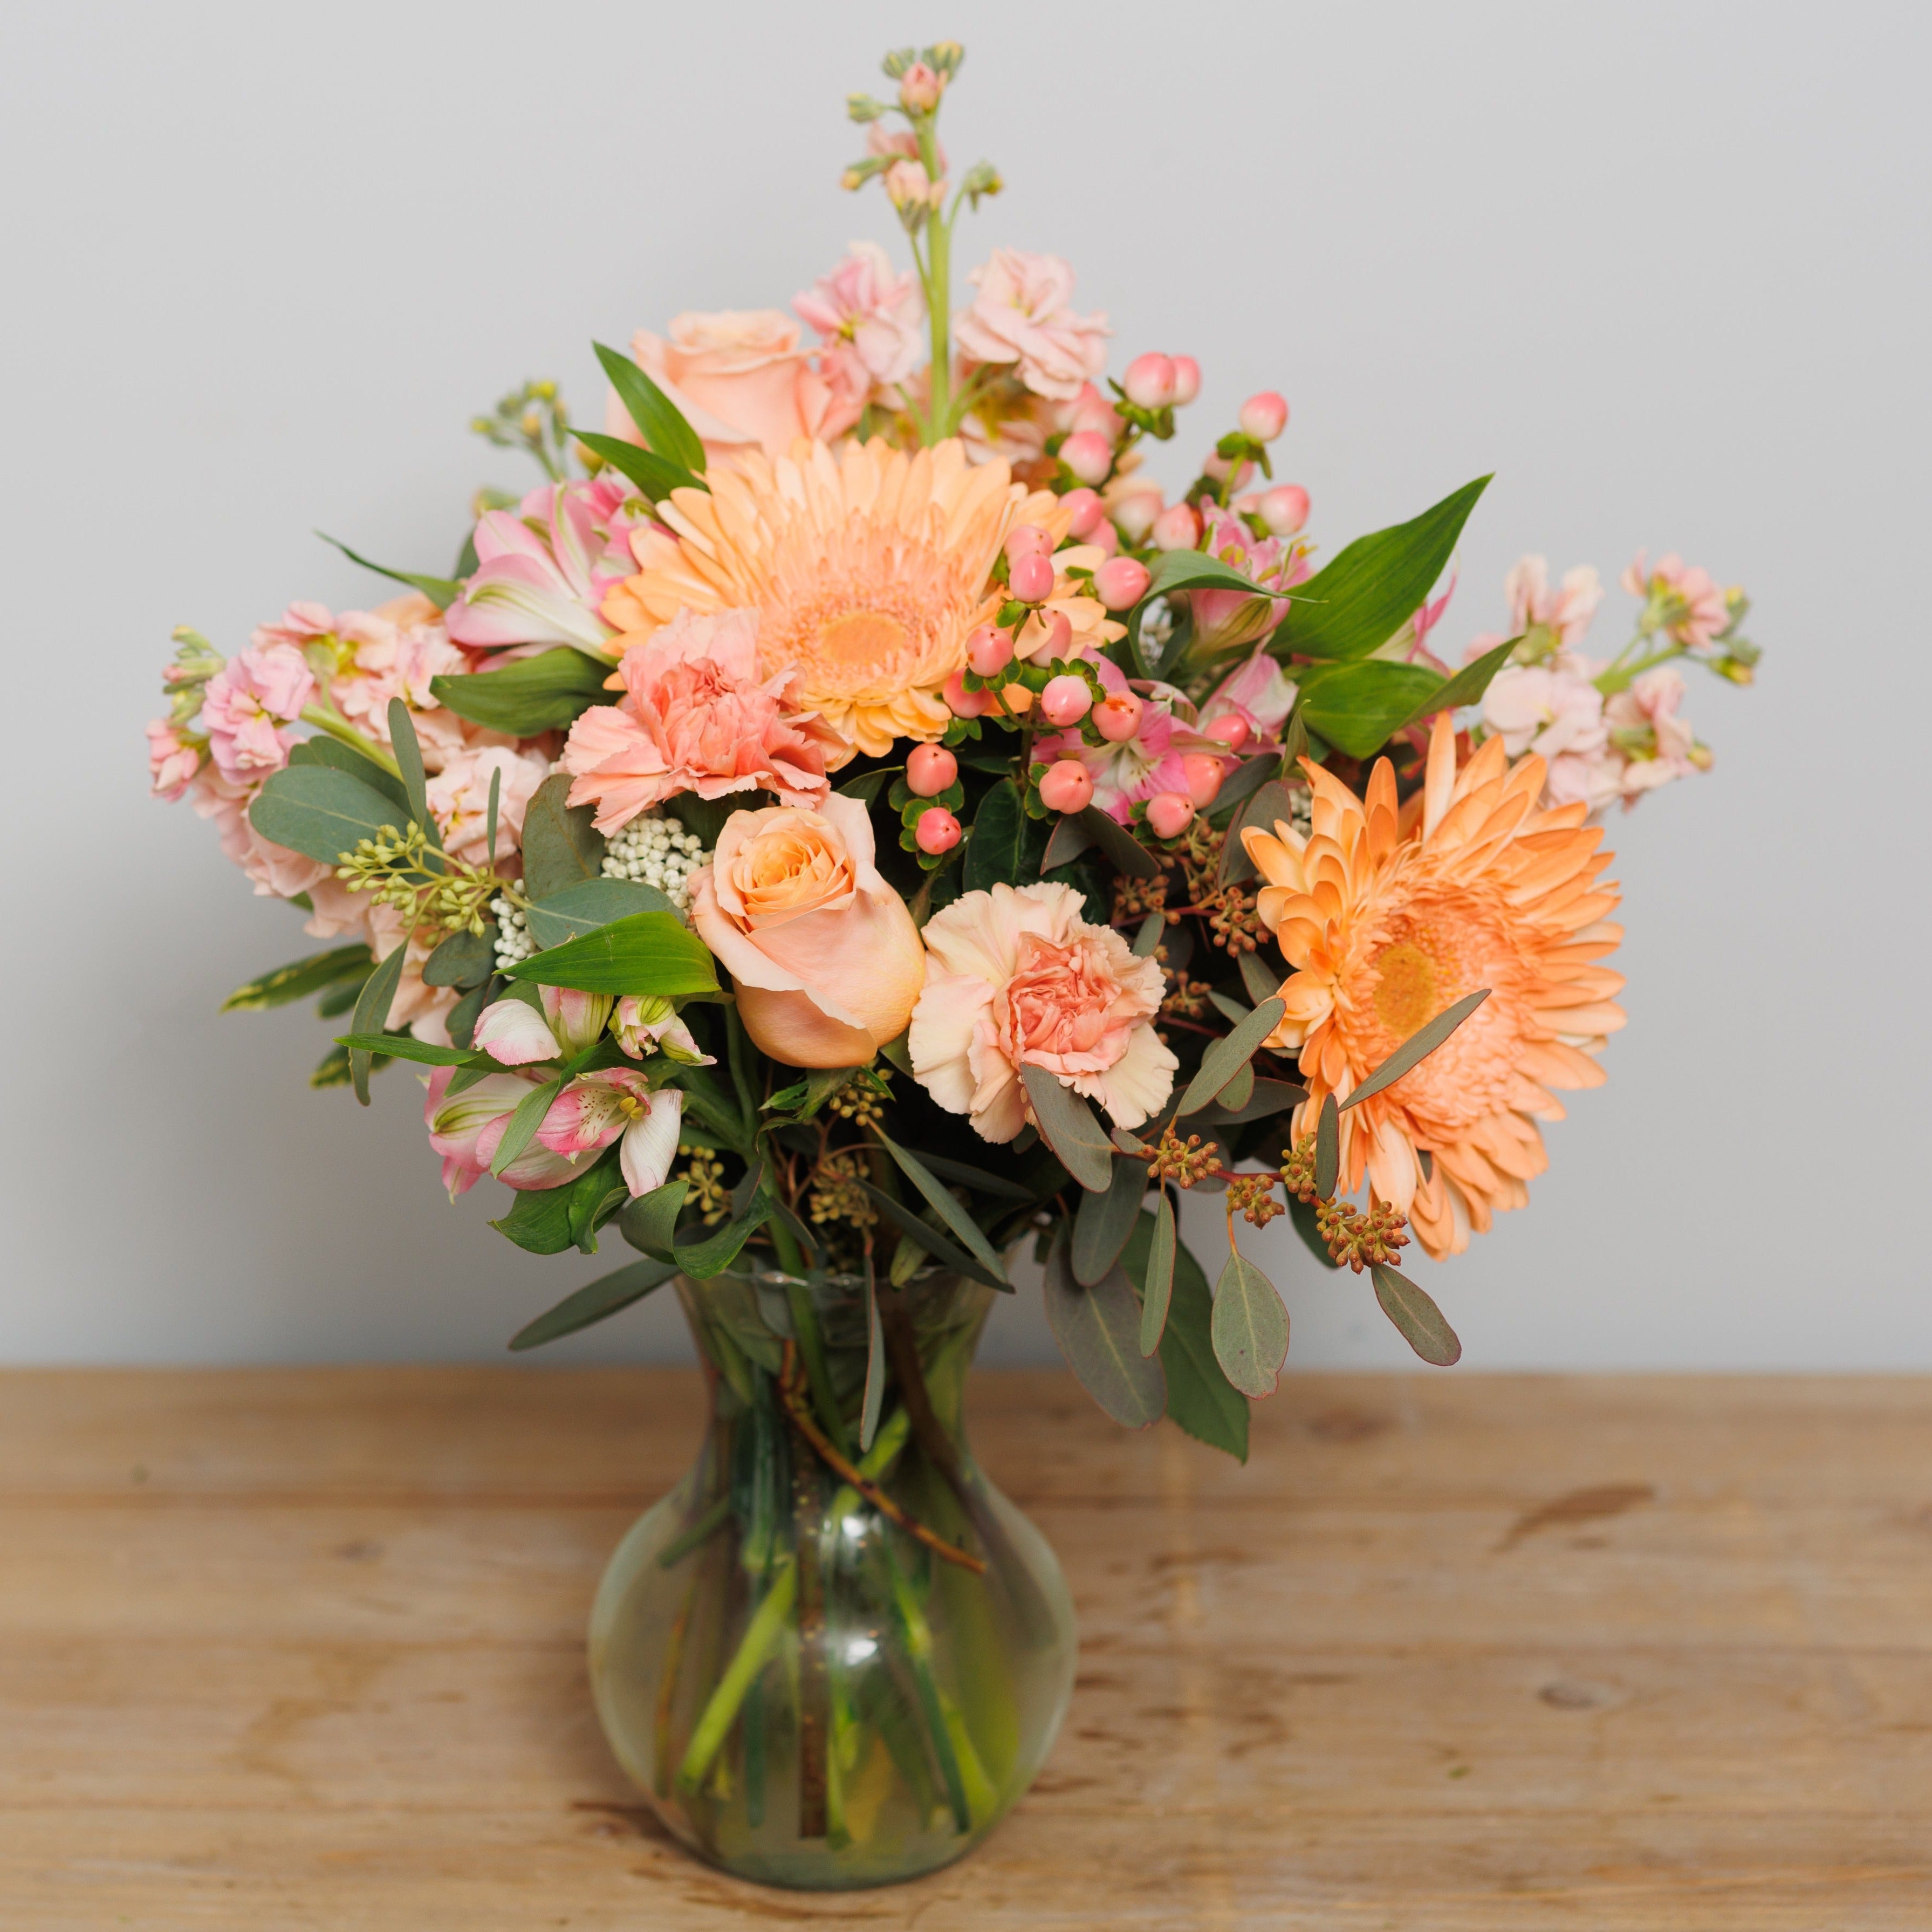 Shades of peach and pink flowers in a vase.